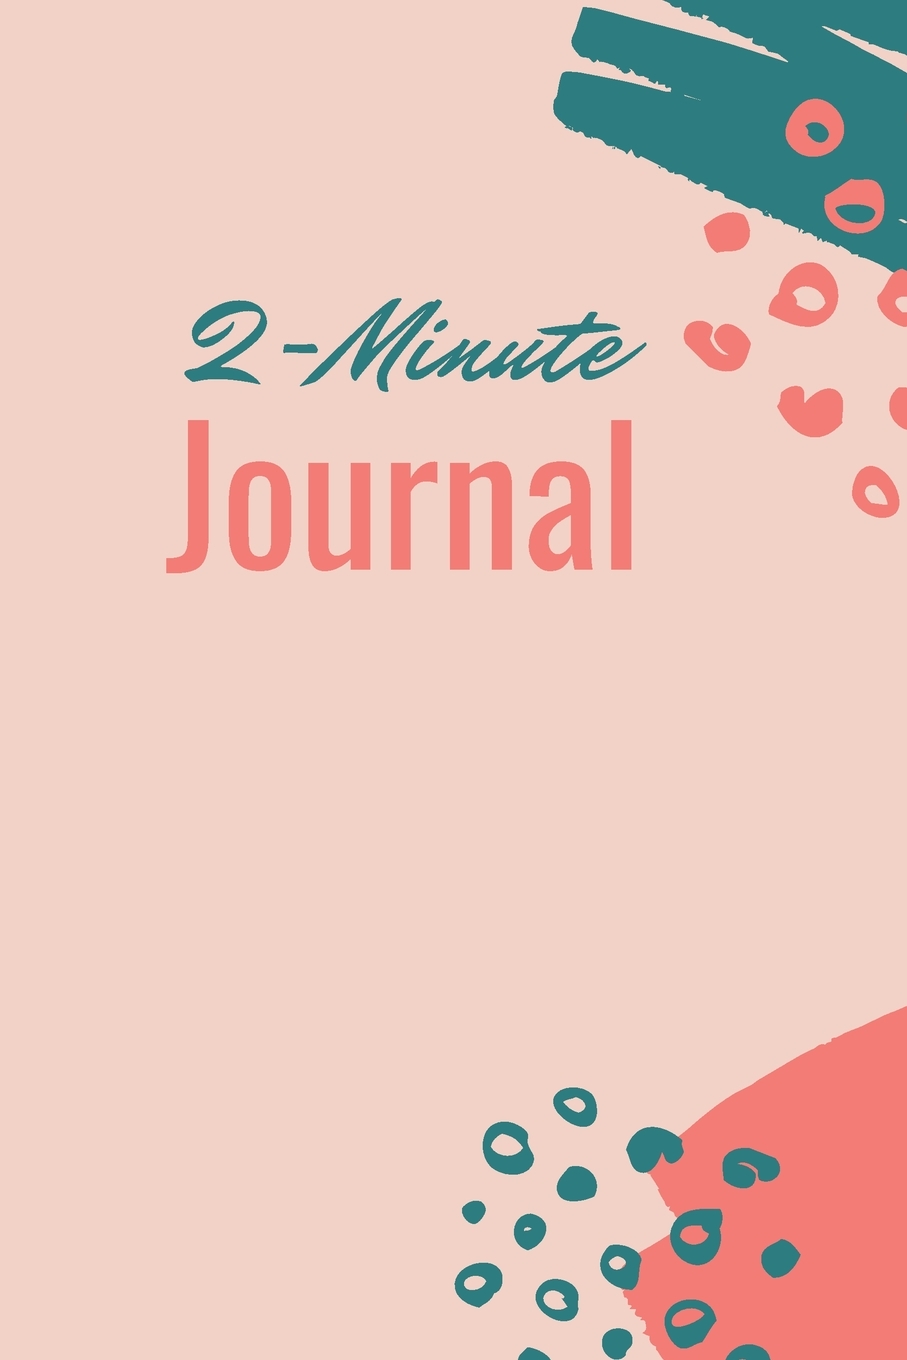 2-Minute Journal to Win Your Day Every Day, Lined, 6" x 9" (Paperback) - image 1 of 1